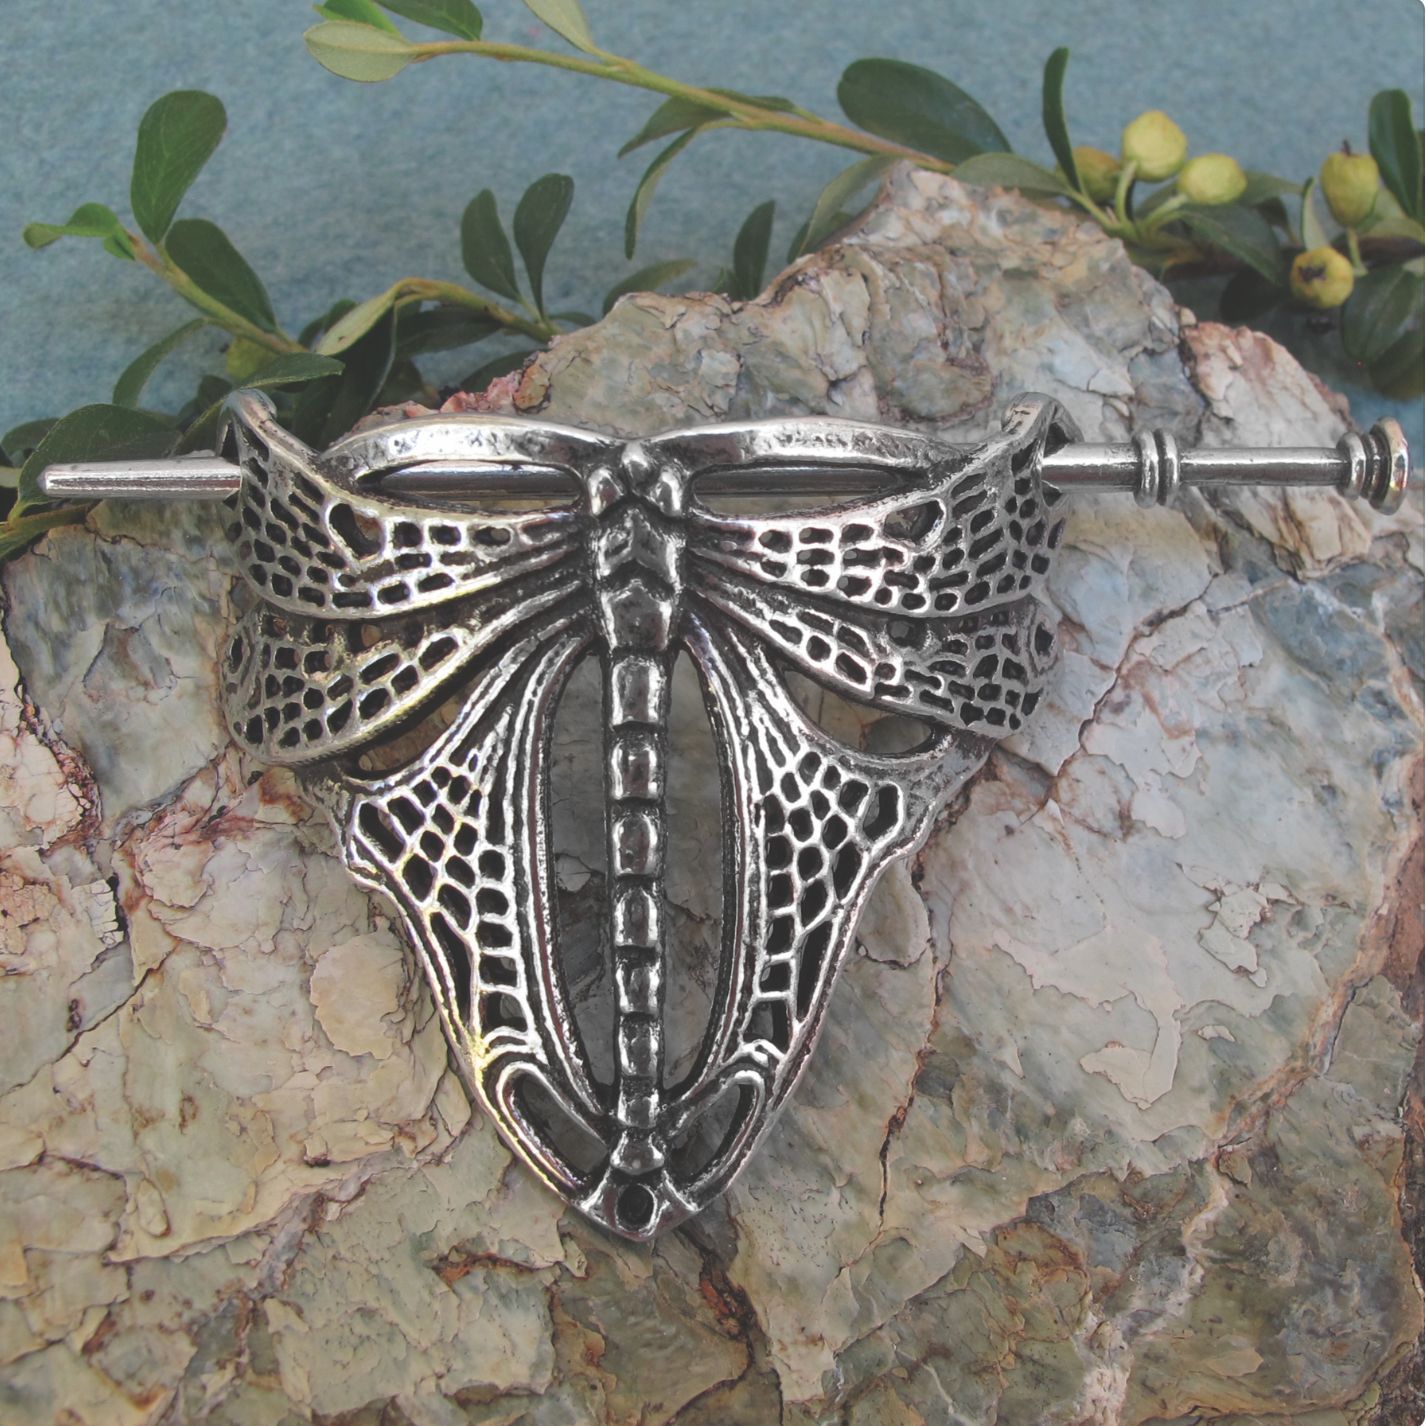 Oberon Design Leather and Jewelry Dragonfly Image Collection